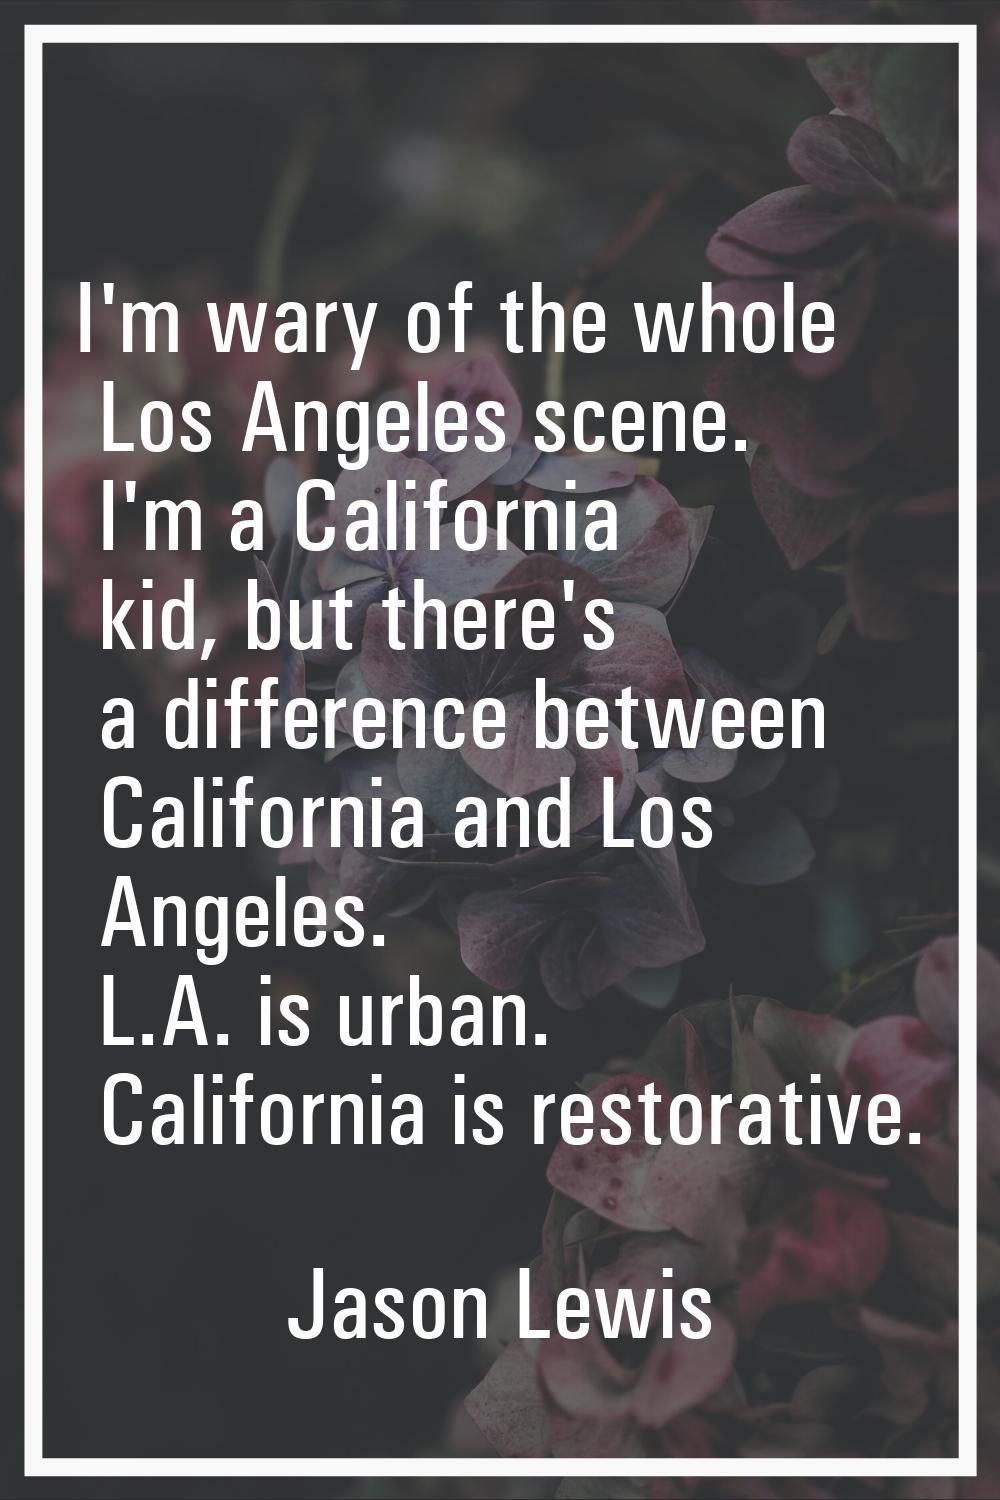 I'm wary of the whole Los Angeles scene. I'm a California kid, but there's a difference between Cal